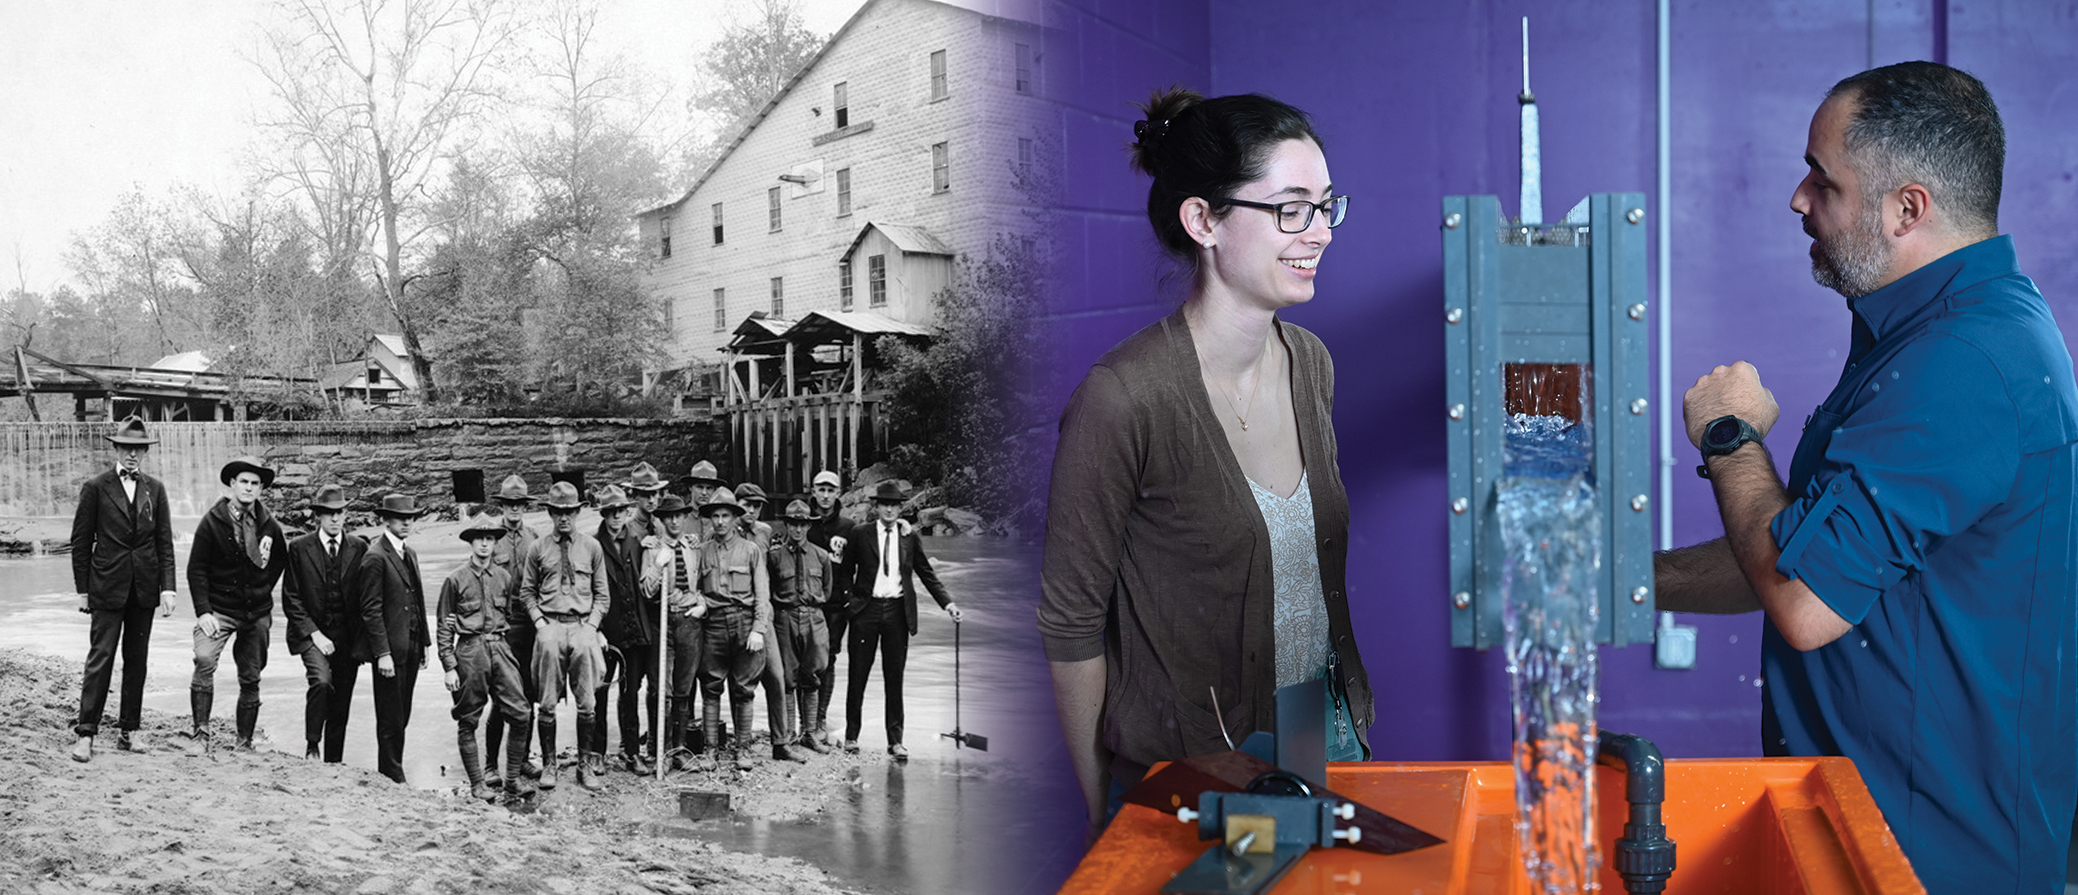 A composite blend of two photos. On the left is a black and white image from early 20th century showing a team of land surveyors. On the right is a color photo of a female student working with a male professor on a project.